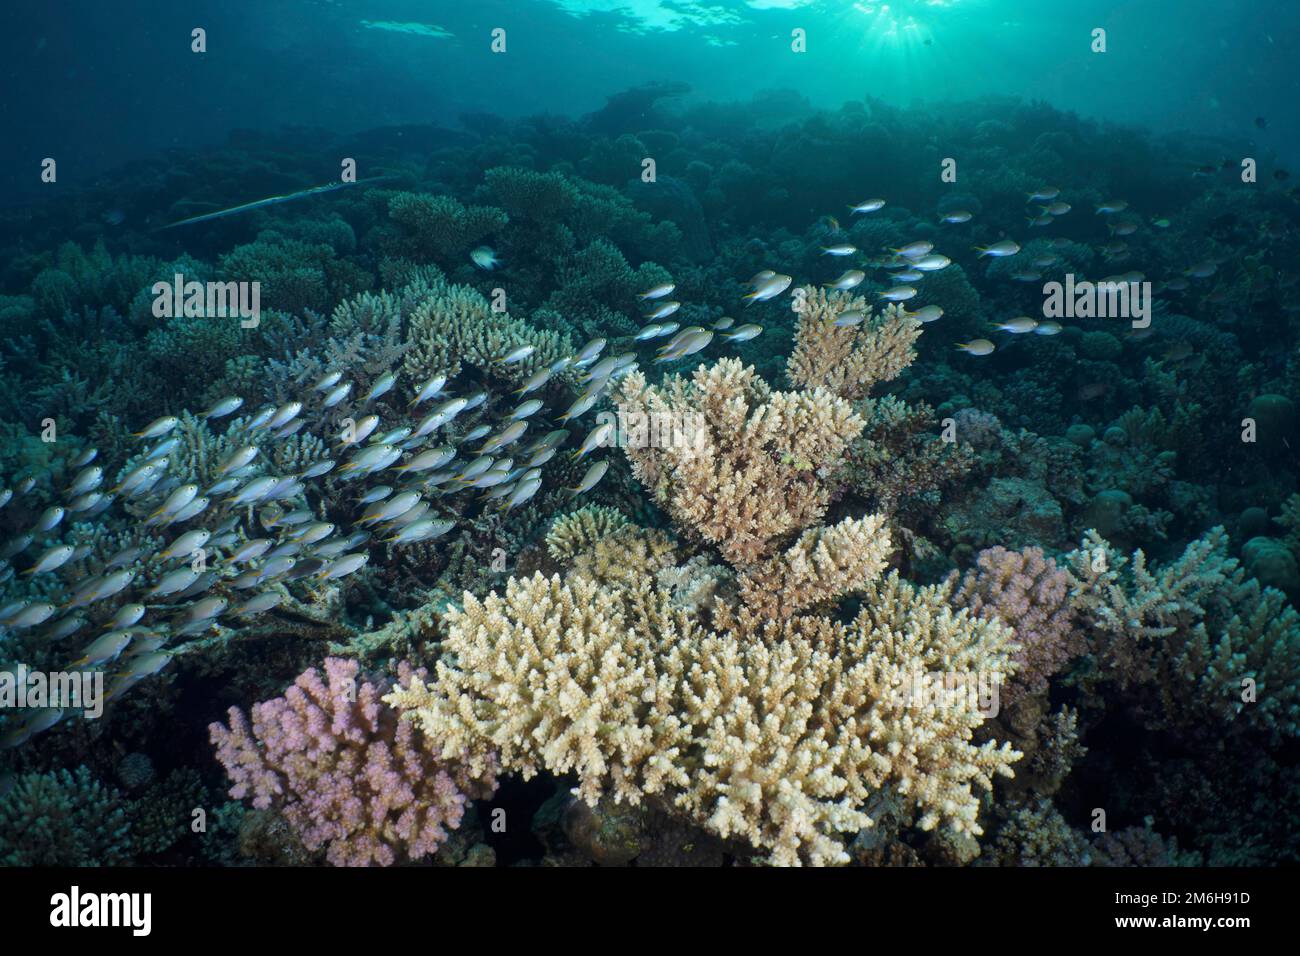 A large school of miry's damselfish (Neopomacentrus miryae) swims over the reef at sunrise with raspberry coral (Pocillopora damicornis) and small Stock Photo